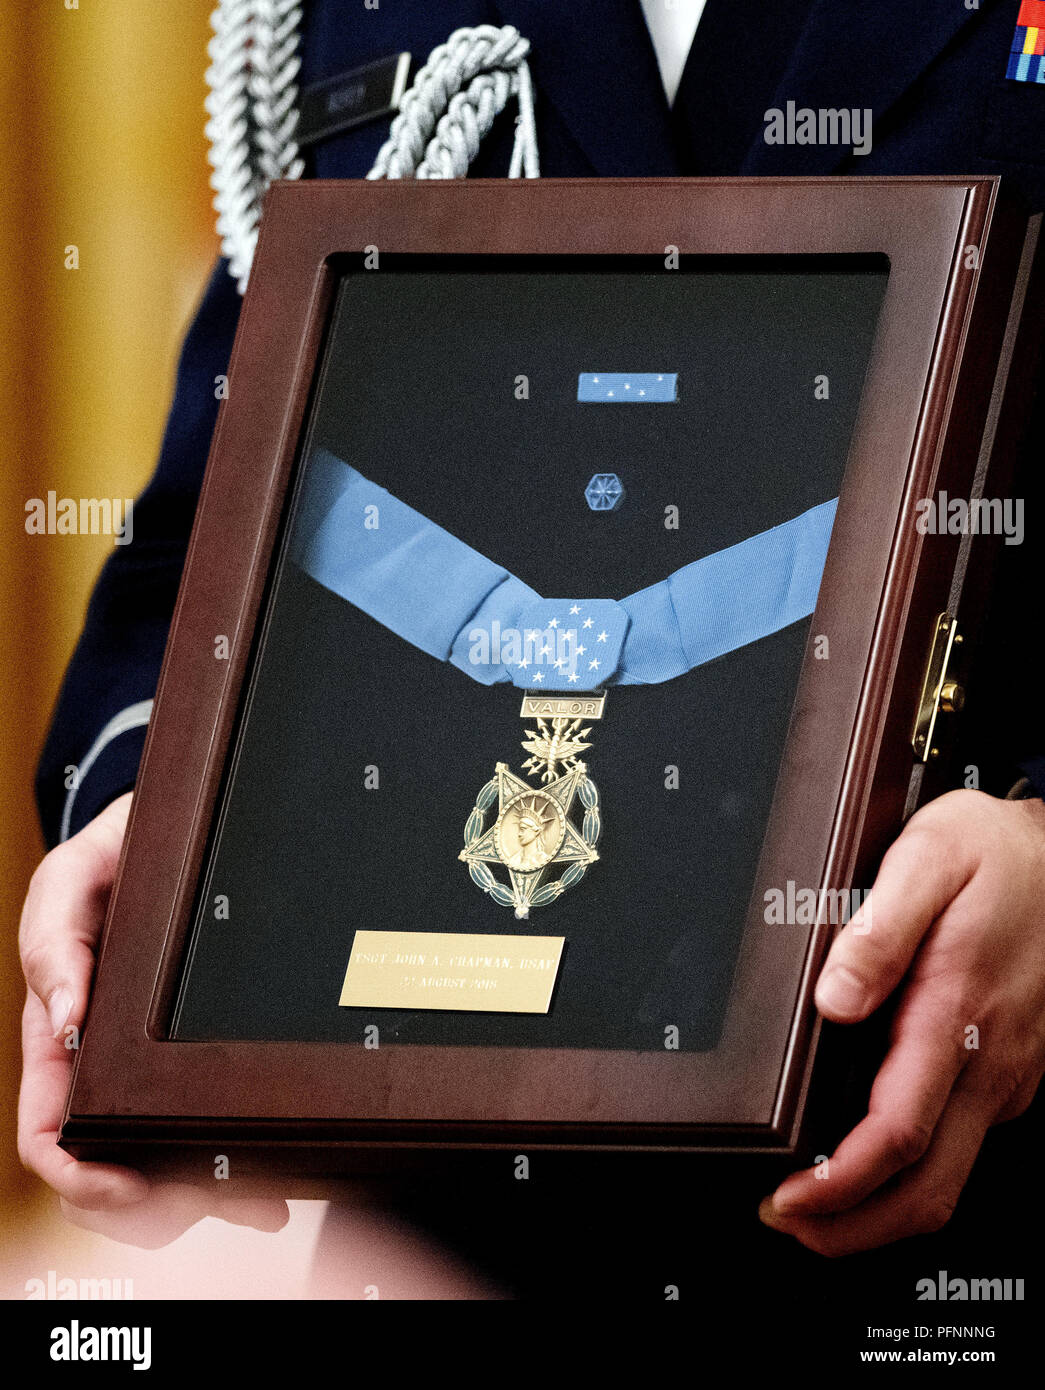 Washington, District of Columbia, USA. 22nd Aug, 2018. Close-up of the Congressional Medal of Honor that is being awarded posthumously to Technical Sergeant John A. Chapman, United States Air Force by US President Donald J. Trump during a ceremony in the East Room of the White House in Washington, DC on Wednesday, August 22, 2018. Sergeant Chapman is being honored for his actions on March 4, 2002, on Takur Ghar mountain in Afghanistan where he gave his life to save his teammates Credit: Ron Sachs/CNP/ZUMA Wire/Alamy Live News Stock Photo